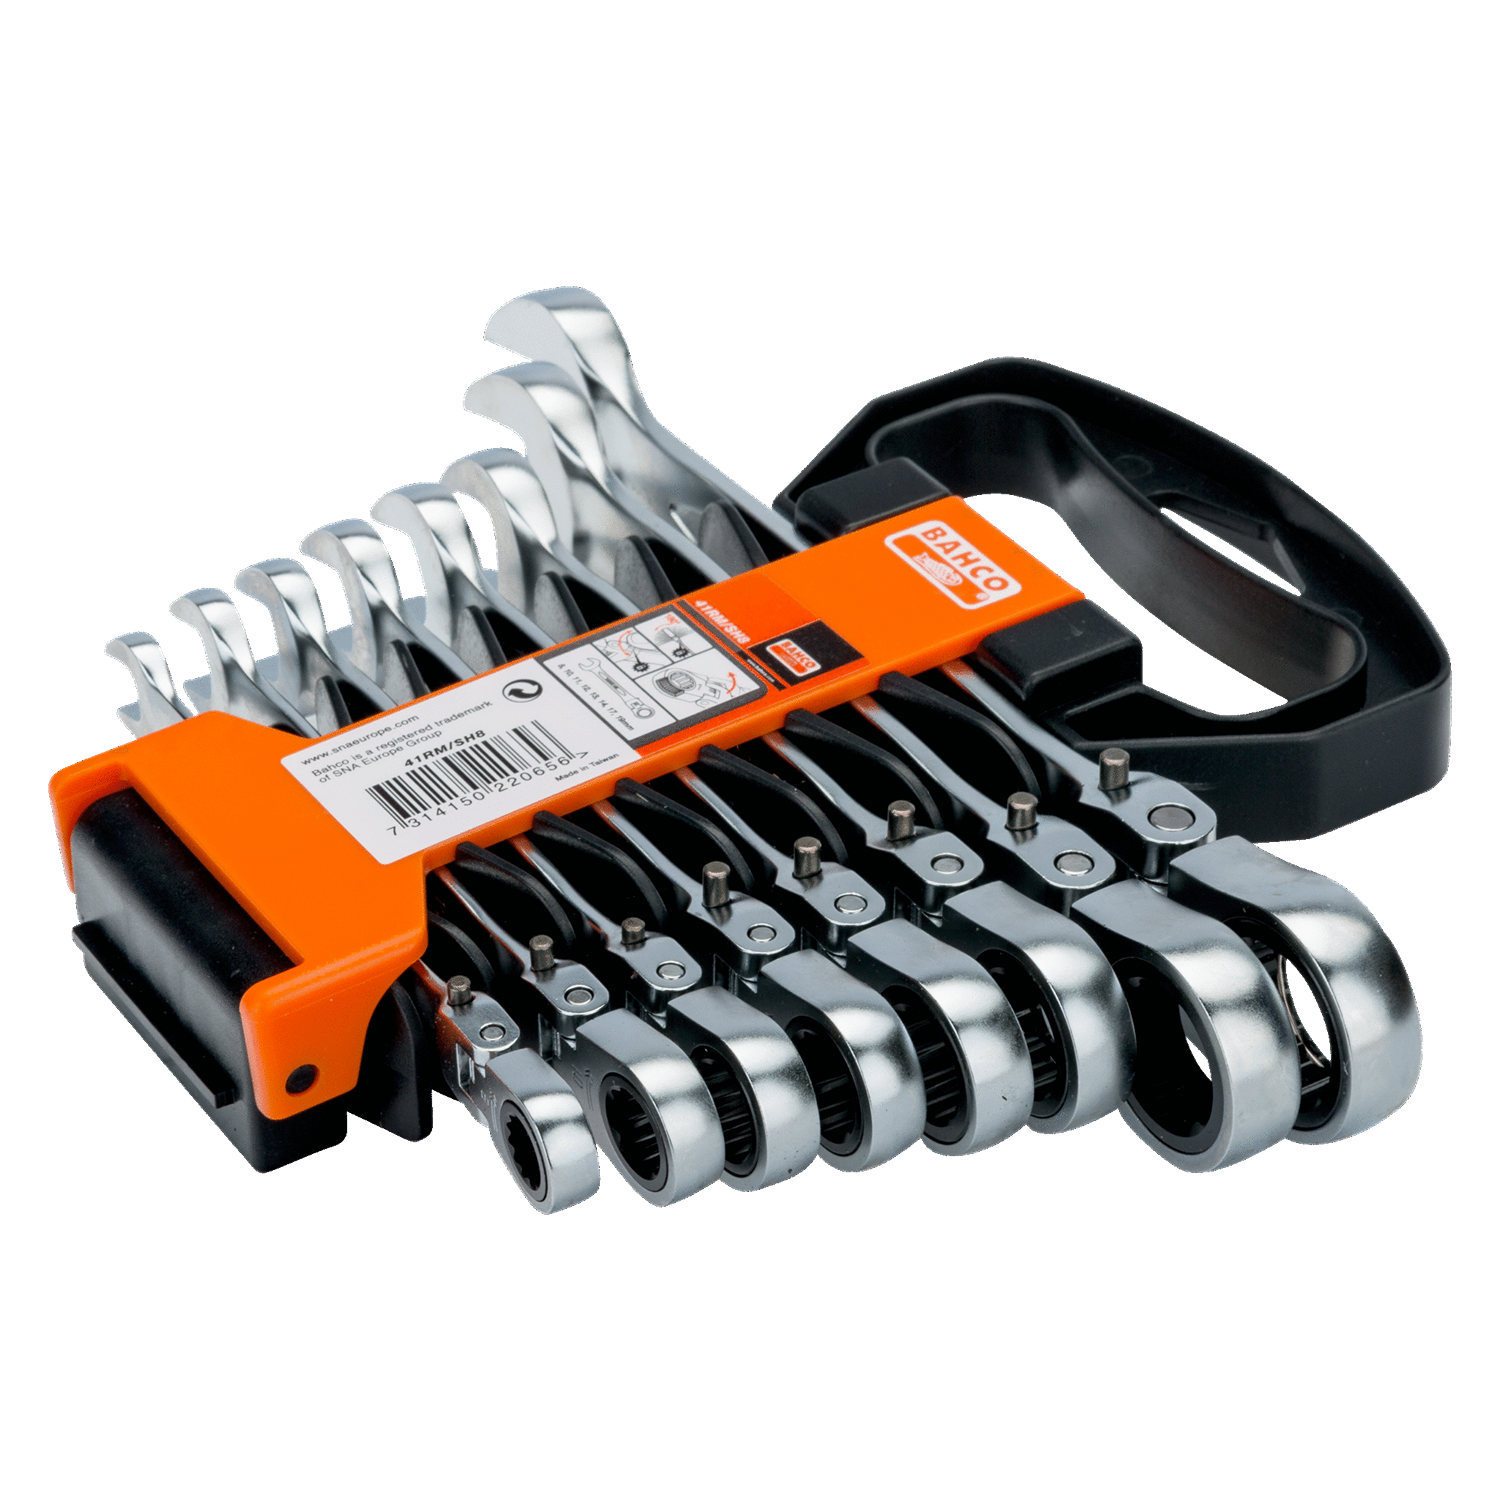 BAHCO 41RM/SH8 Metric Swivel Combination Ratcheting Wrench Set - Premium Combination Ratcheting Wrench Set from BAHCO - Shop now at Yew Aik.